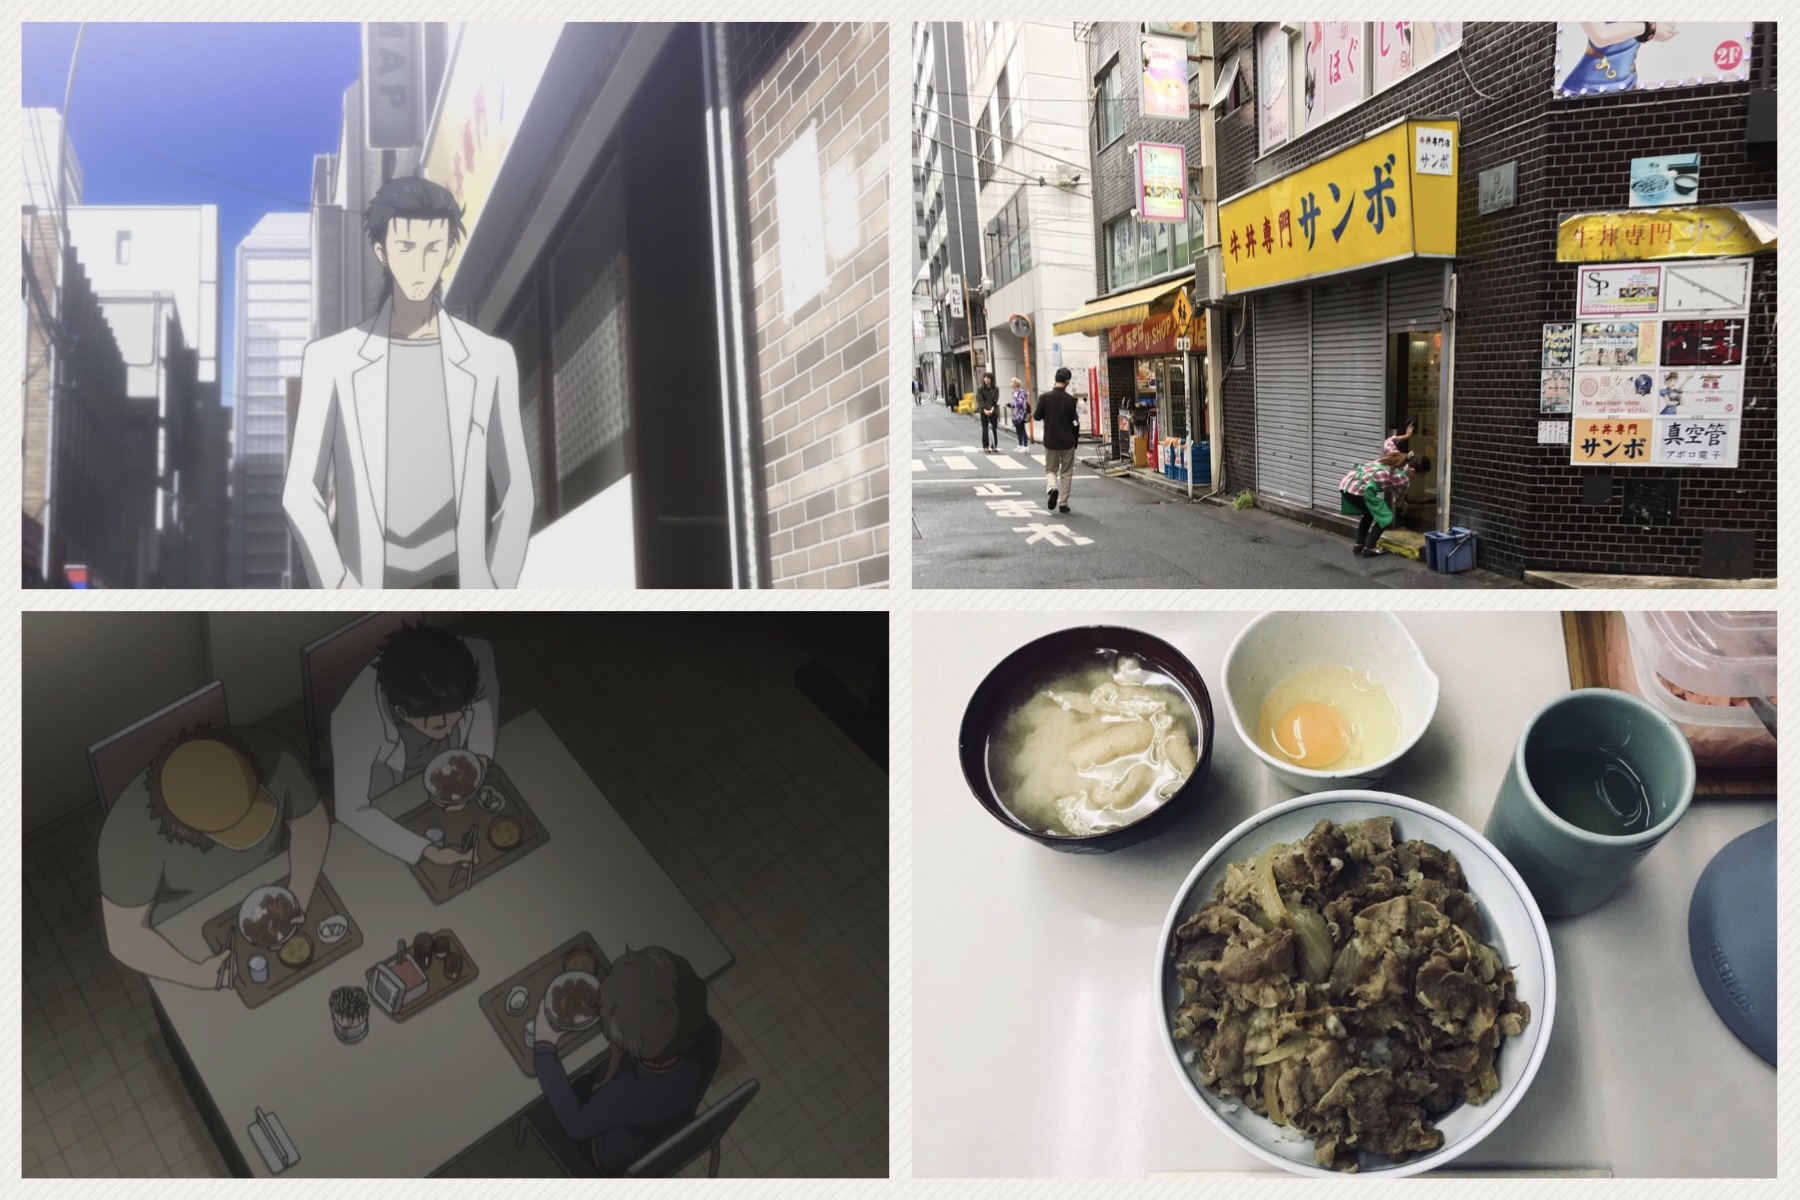 Comparison of stills to real life gyudon